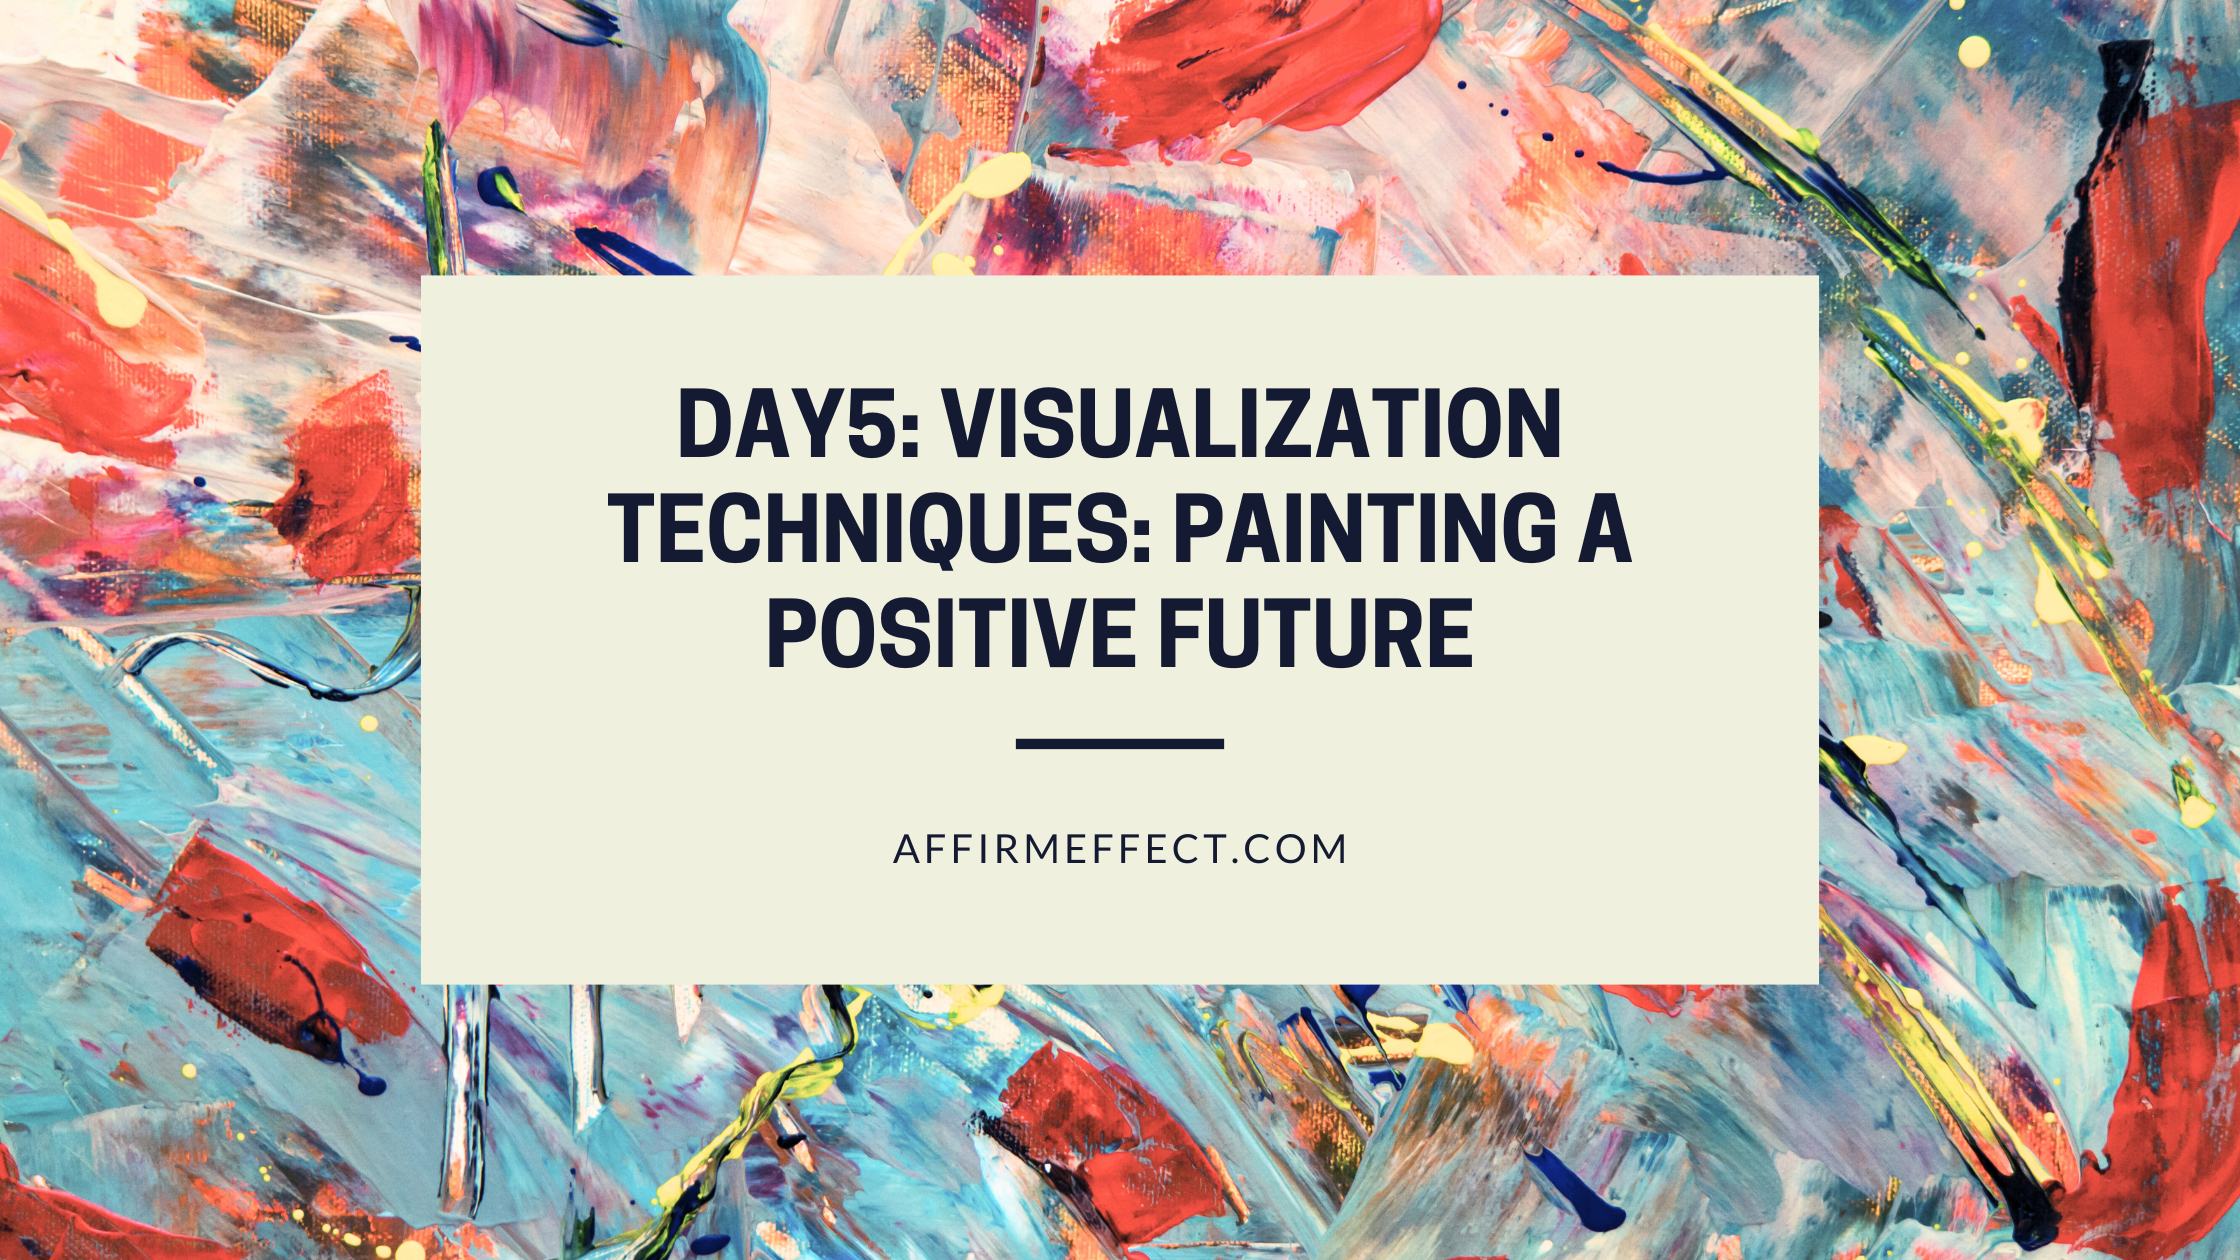 Day 5: Visualization Techniques: Painting a Positive Future